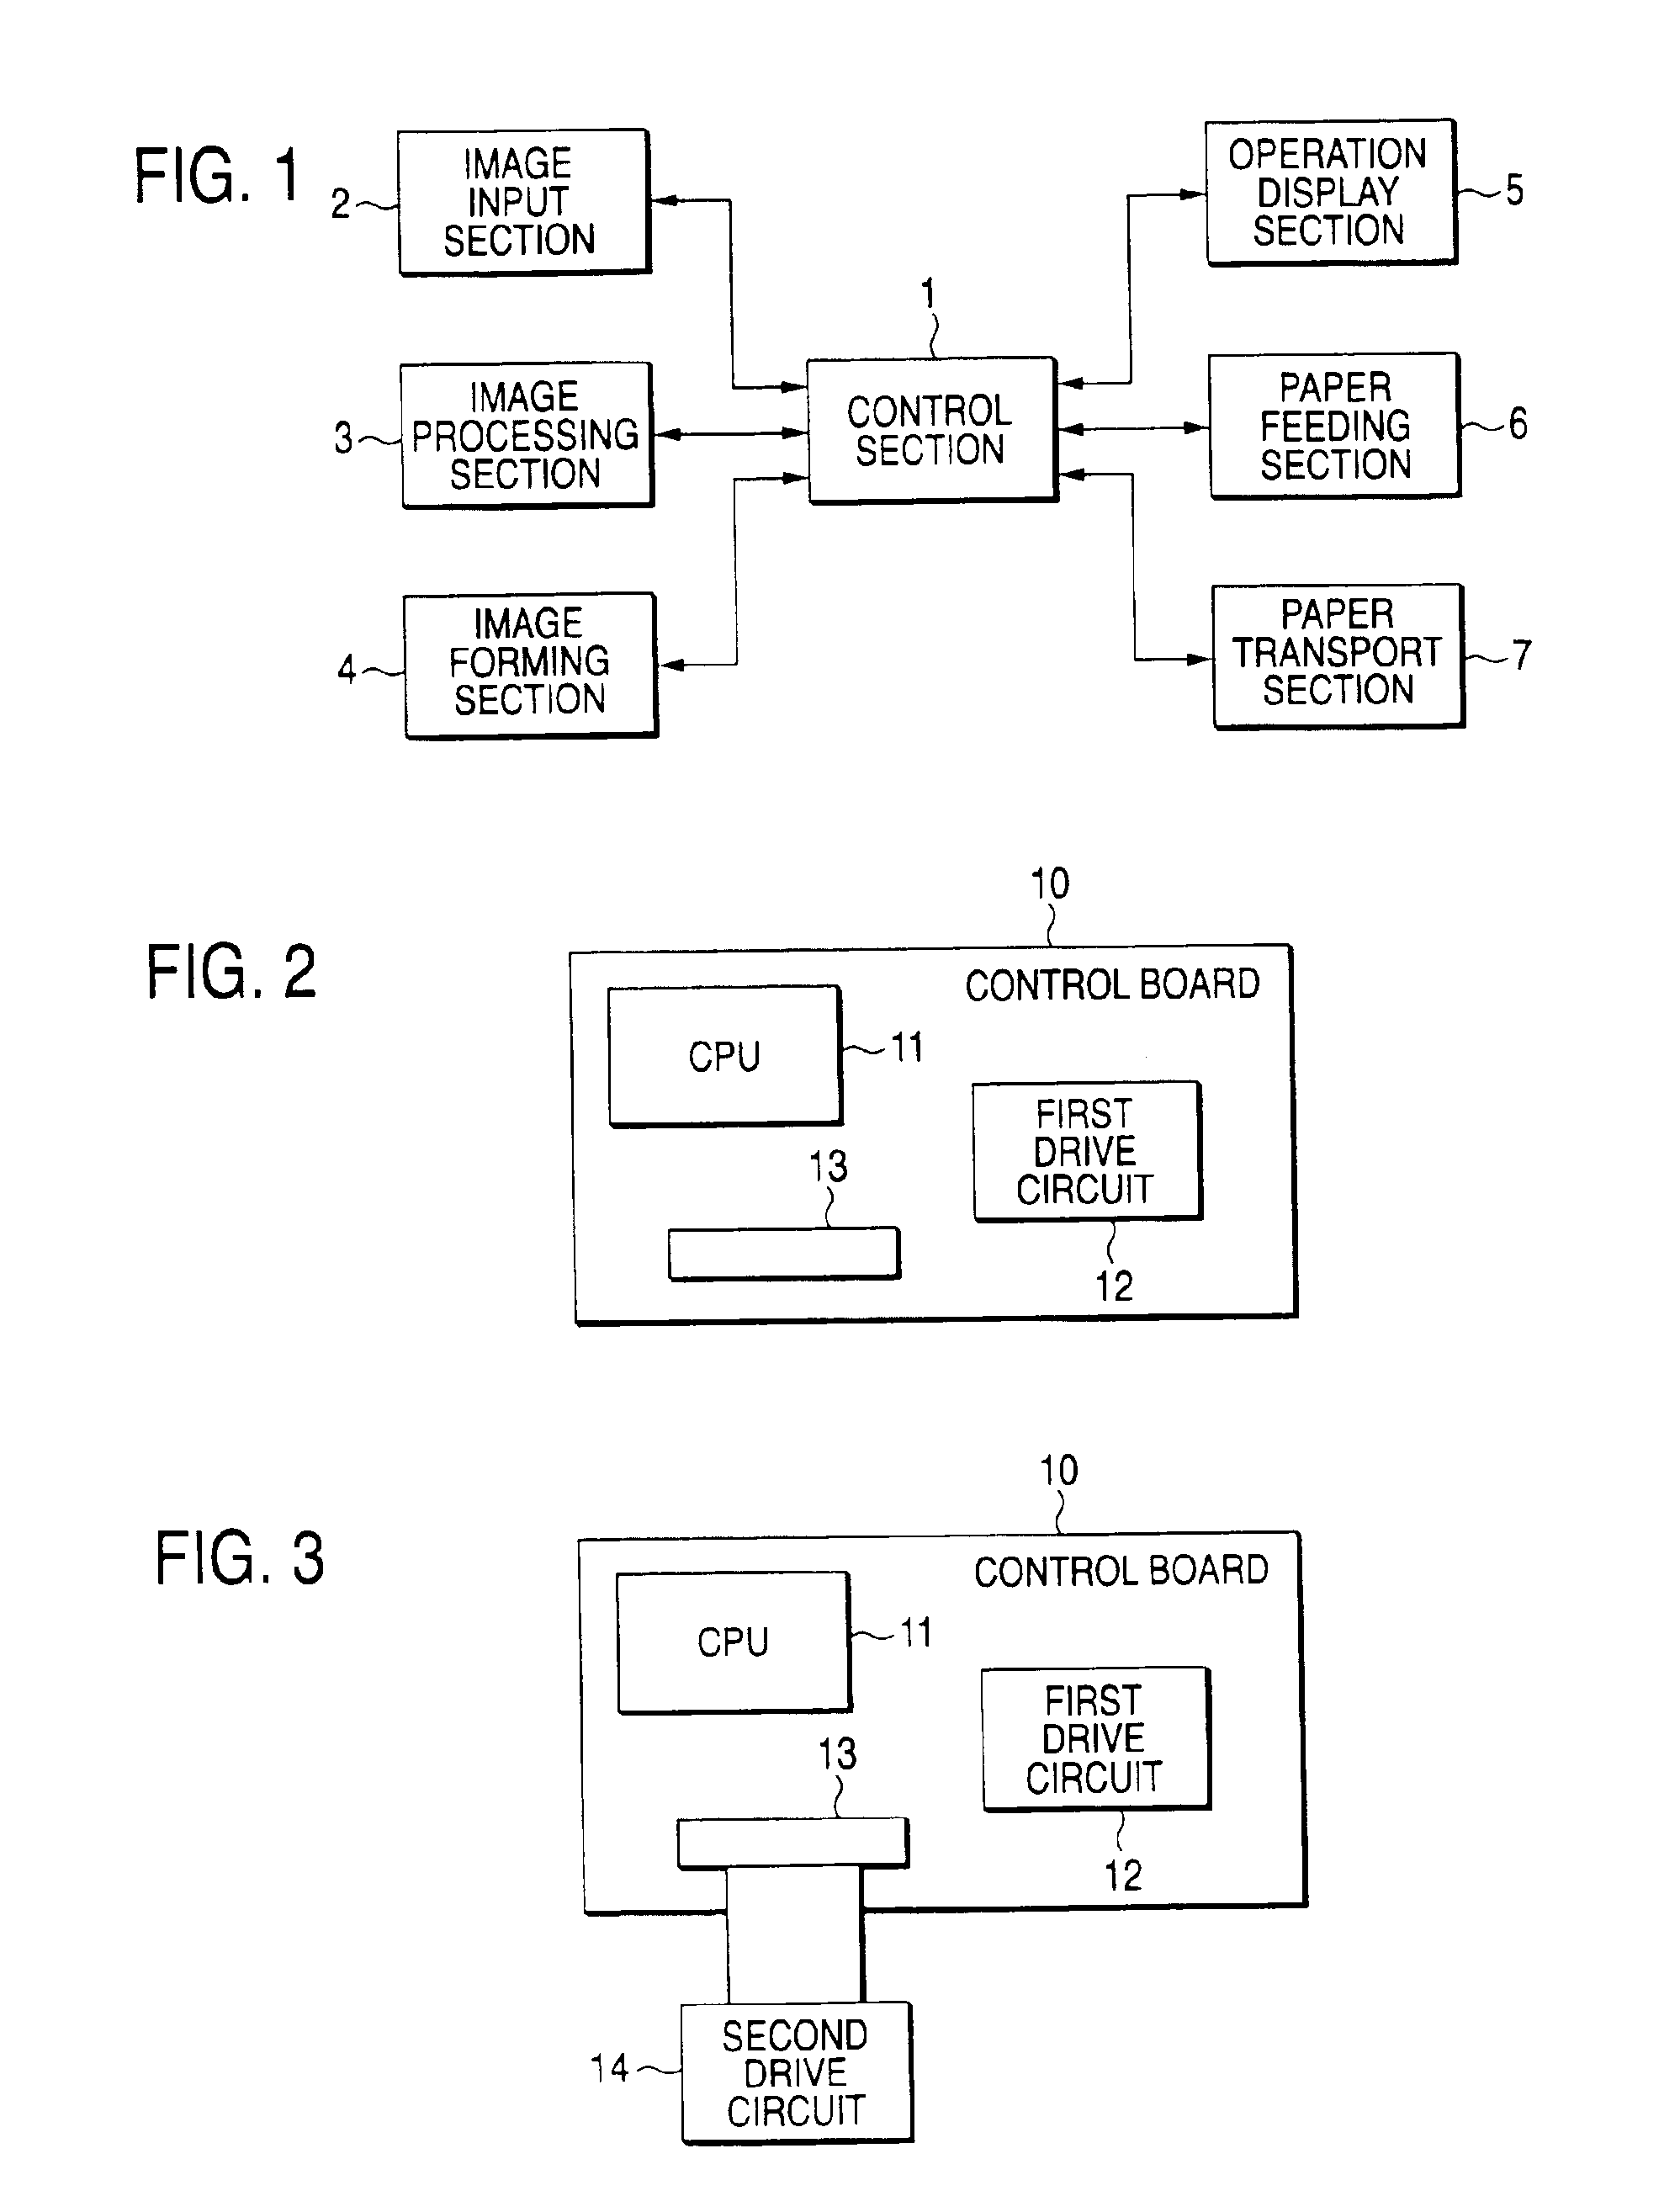 Image forming apparatus and control board thereof, method for recycling the image forming apparatus, and method for recycling the control board